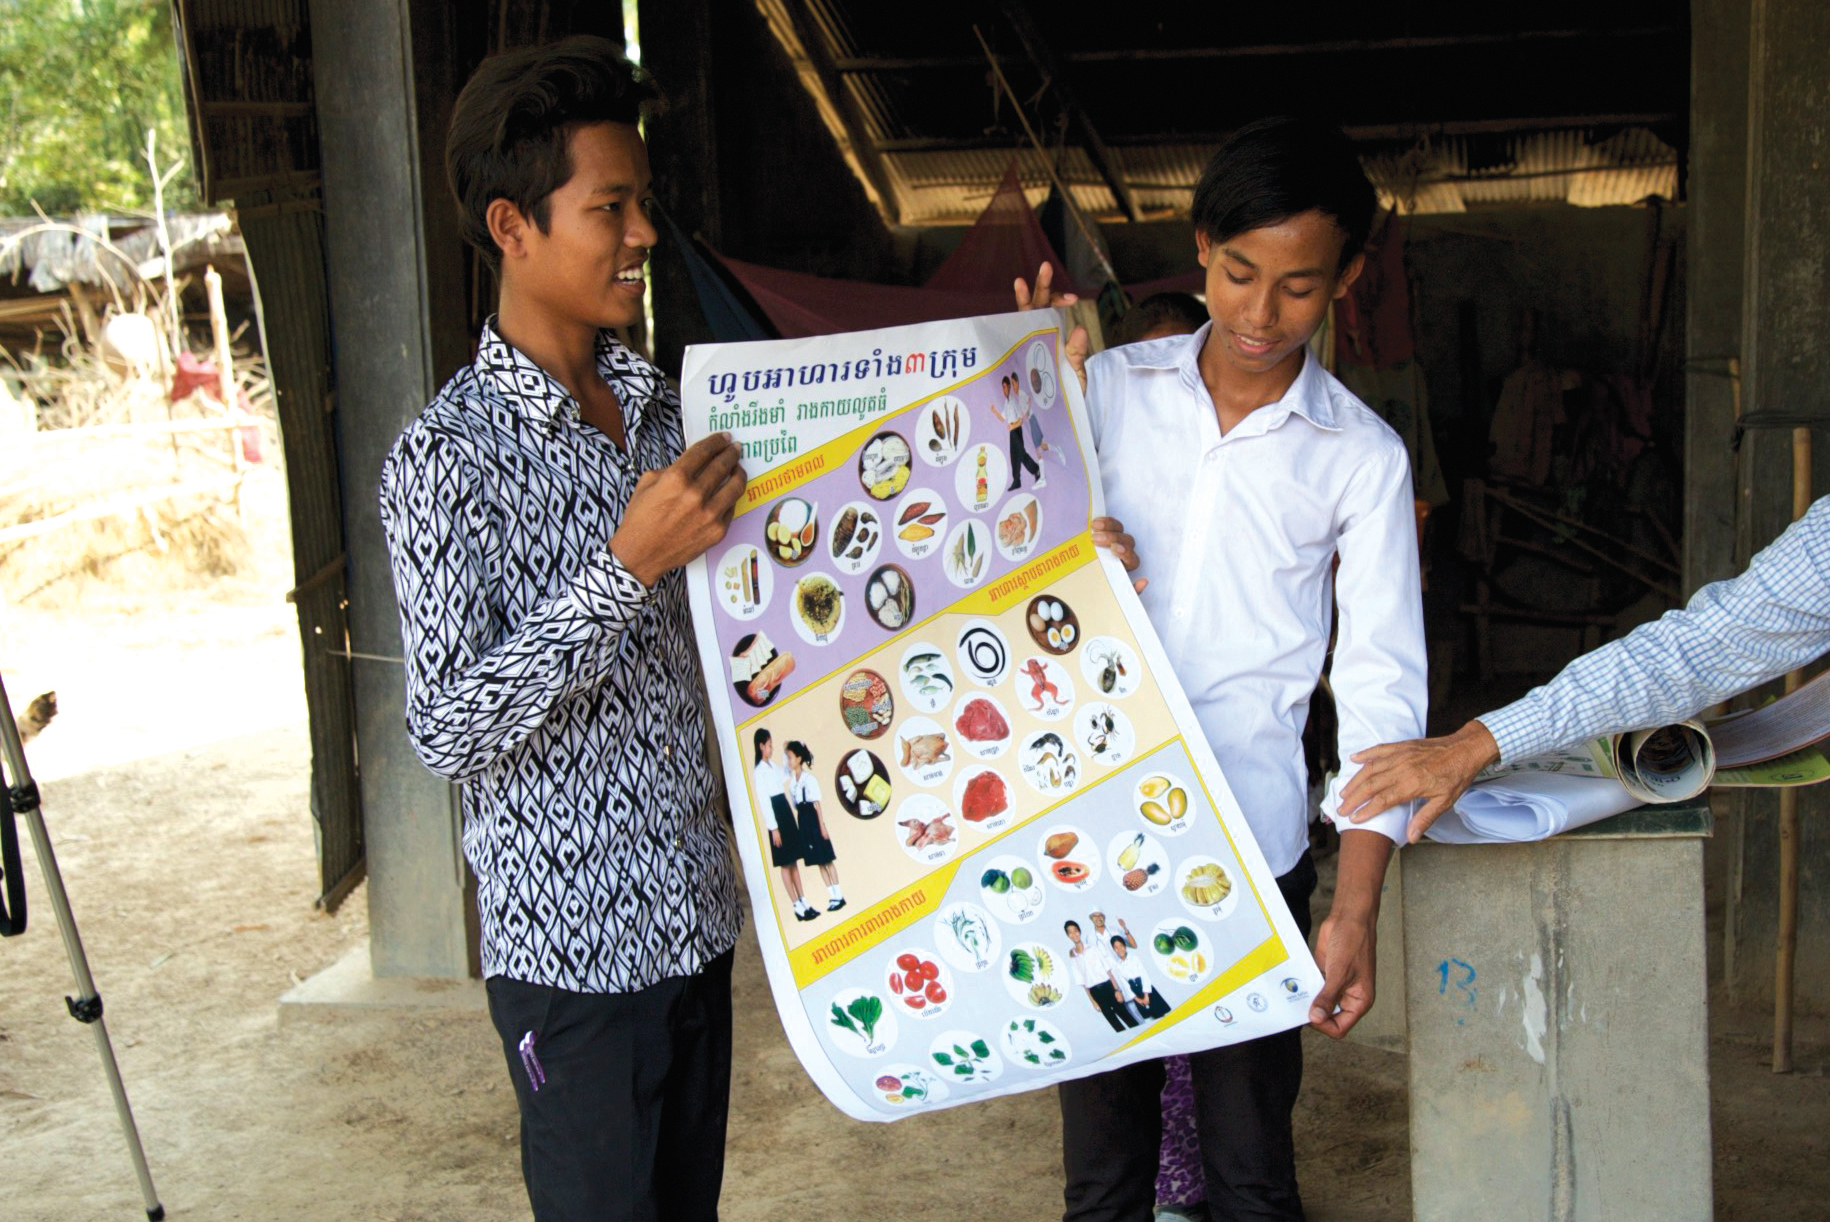 Teaching children in the village. Cambodia sponsorship helps children receive an education in these communities.